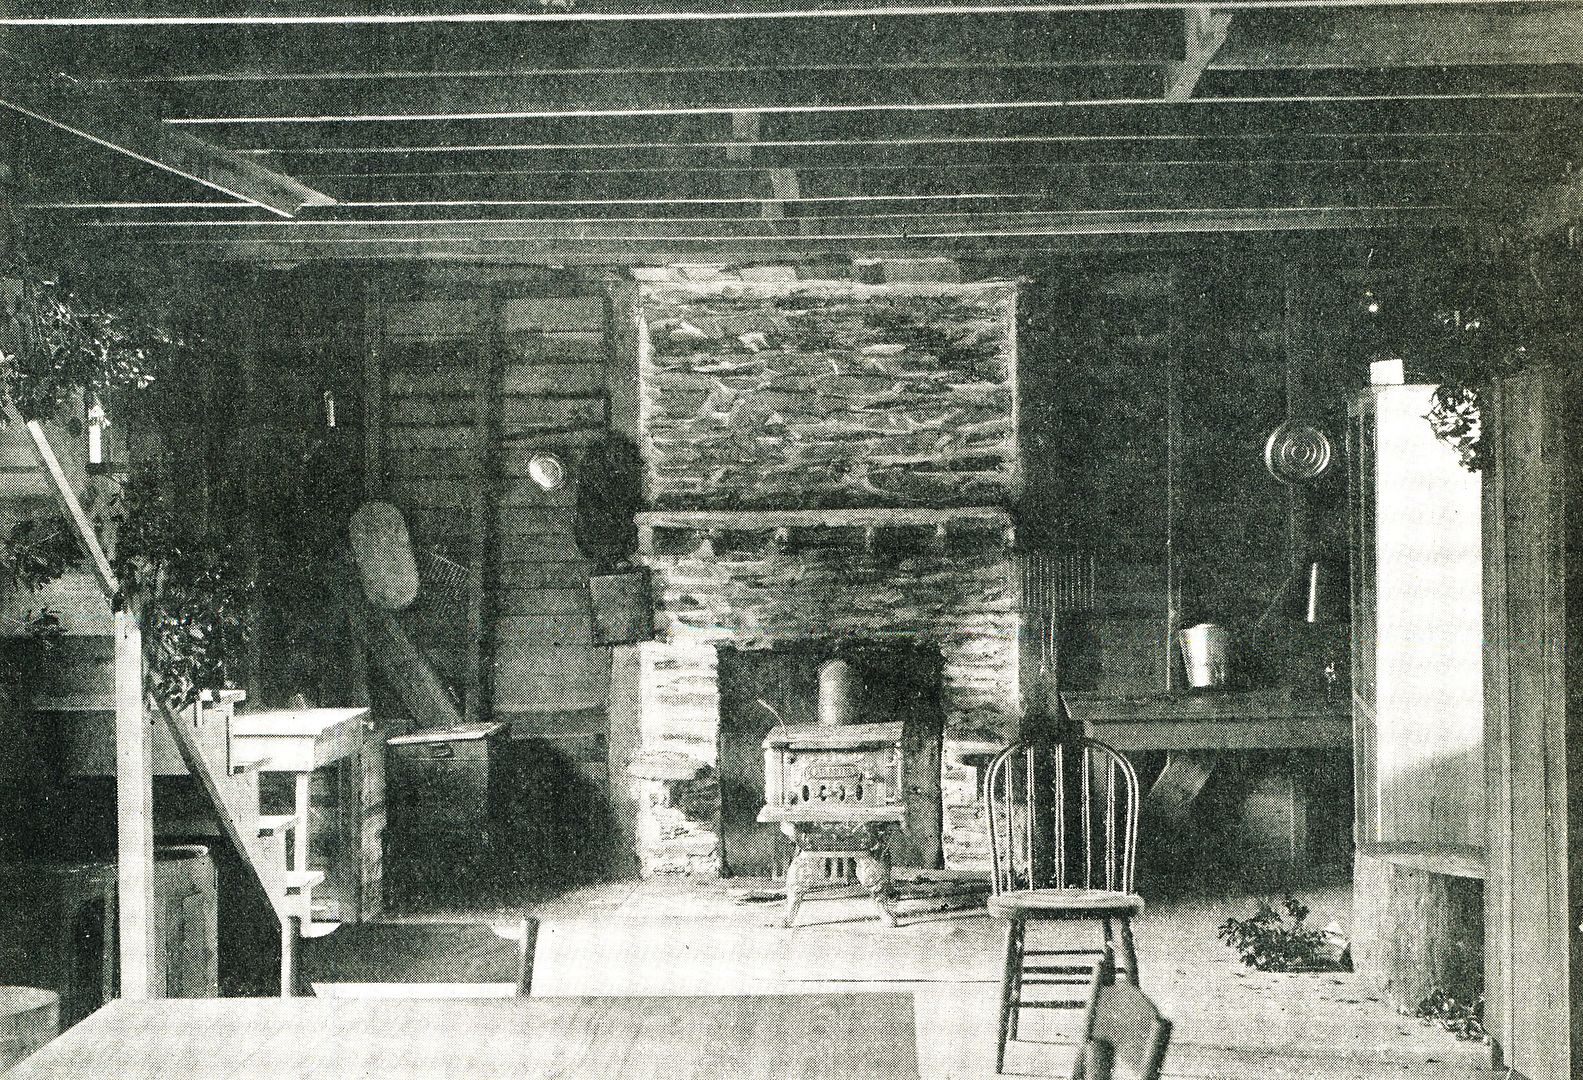 Interior of the retreat. Note the wood-burning stove.